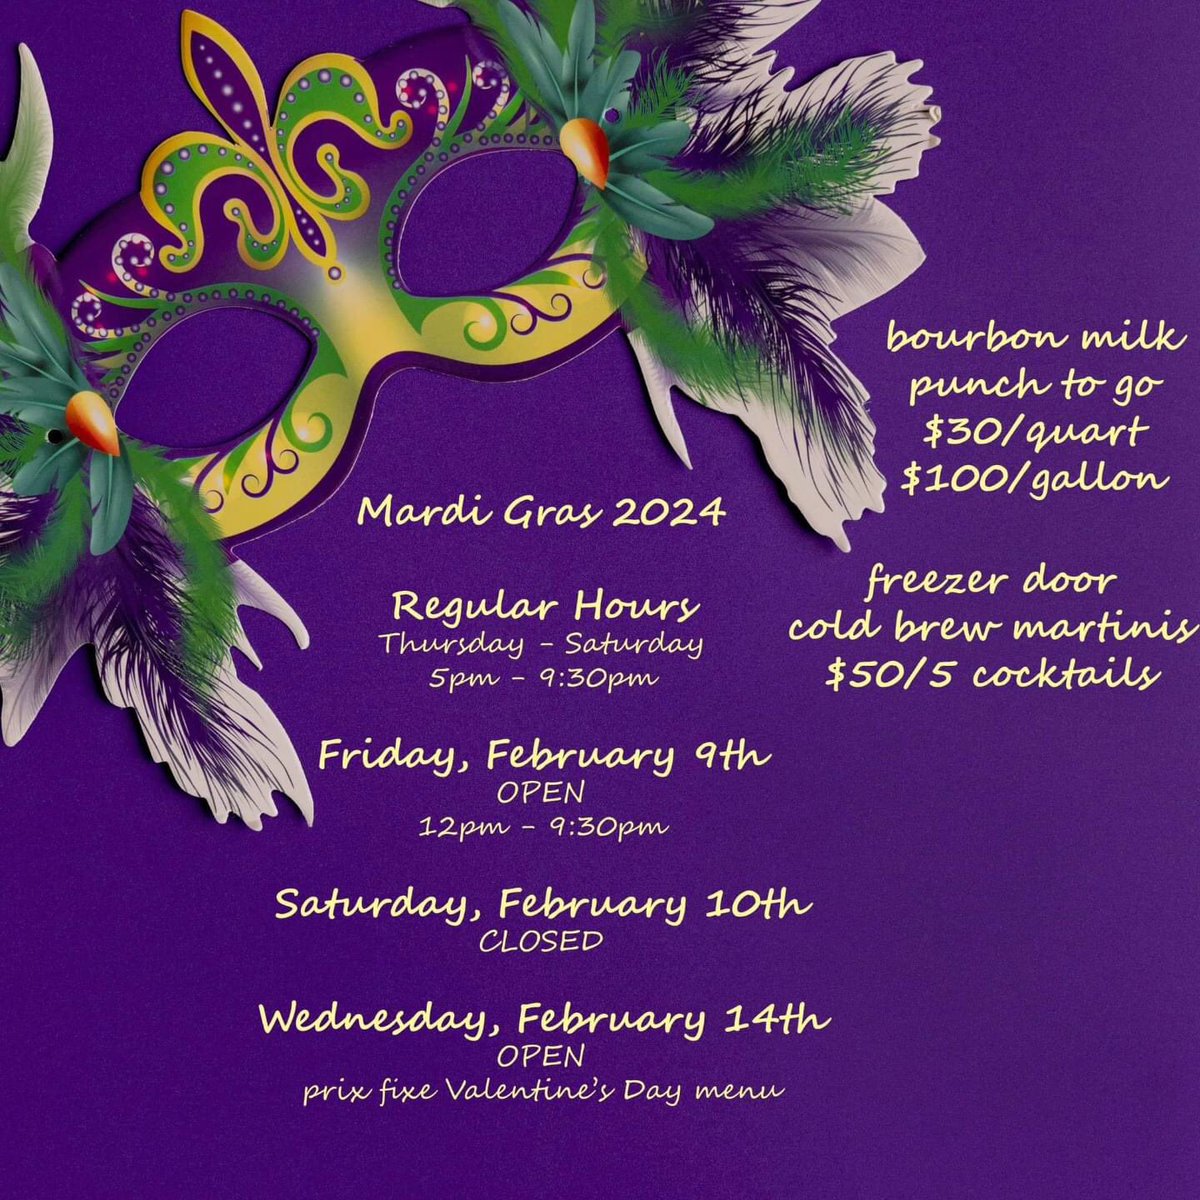 Check out our Mardi Gras schedule. If you're one of those people who keep asking about #FridayLunch, Feb 9th is your day! We will be open for lunch and dinner. Closed 2/10. #MardiGras #fog 1/2